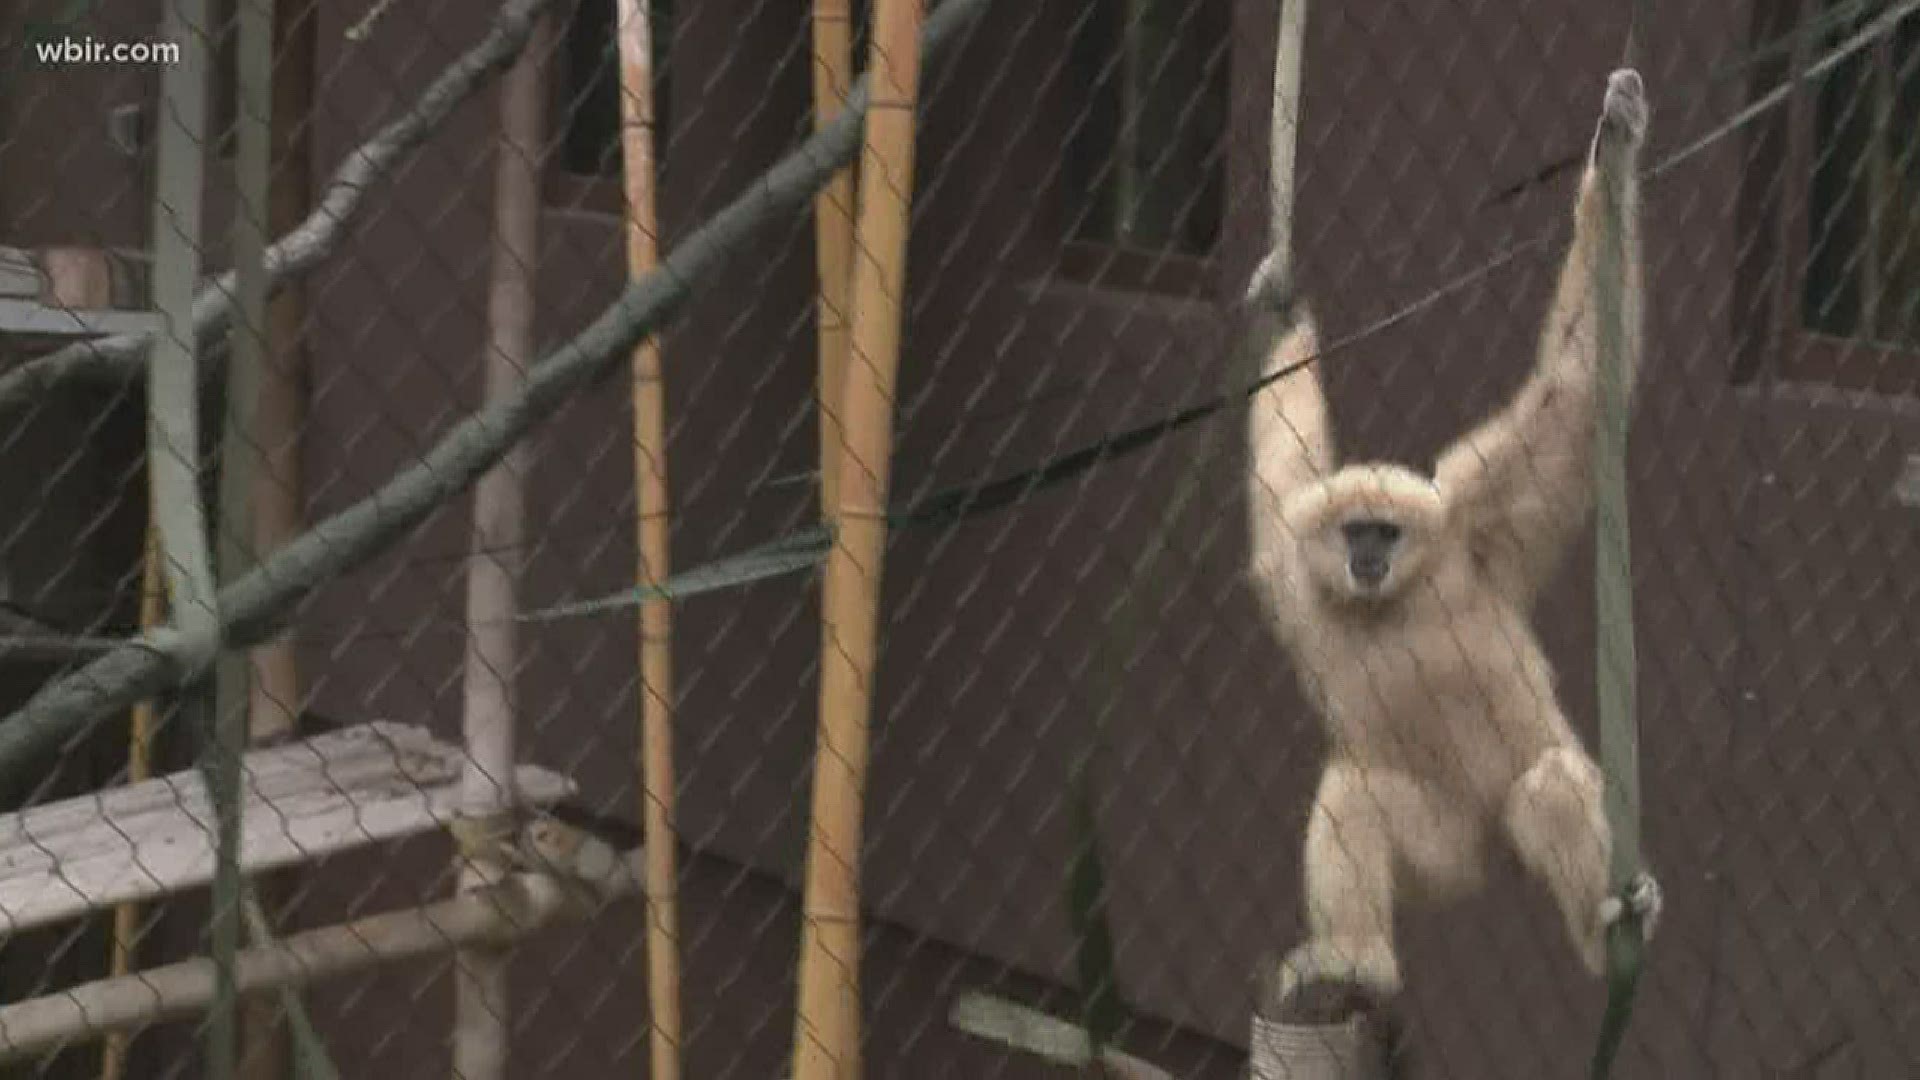 Zoo Knoxville reopened Monday under restrictions to promote social distancing.